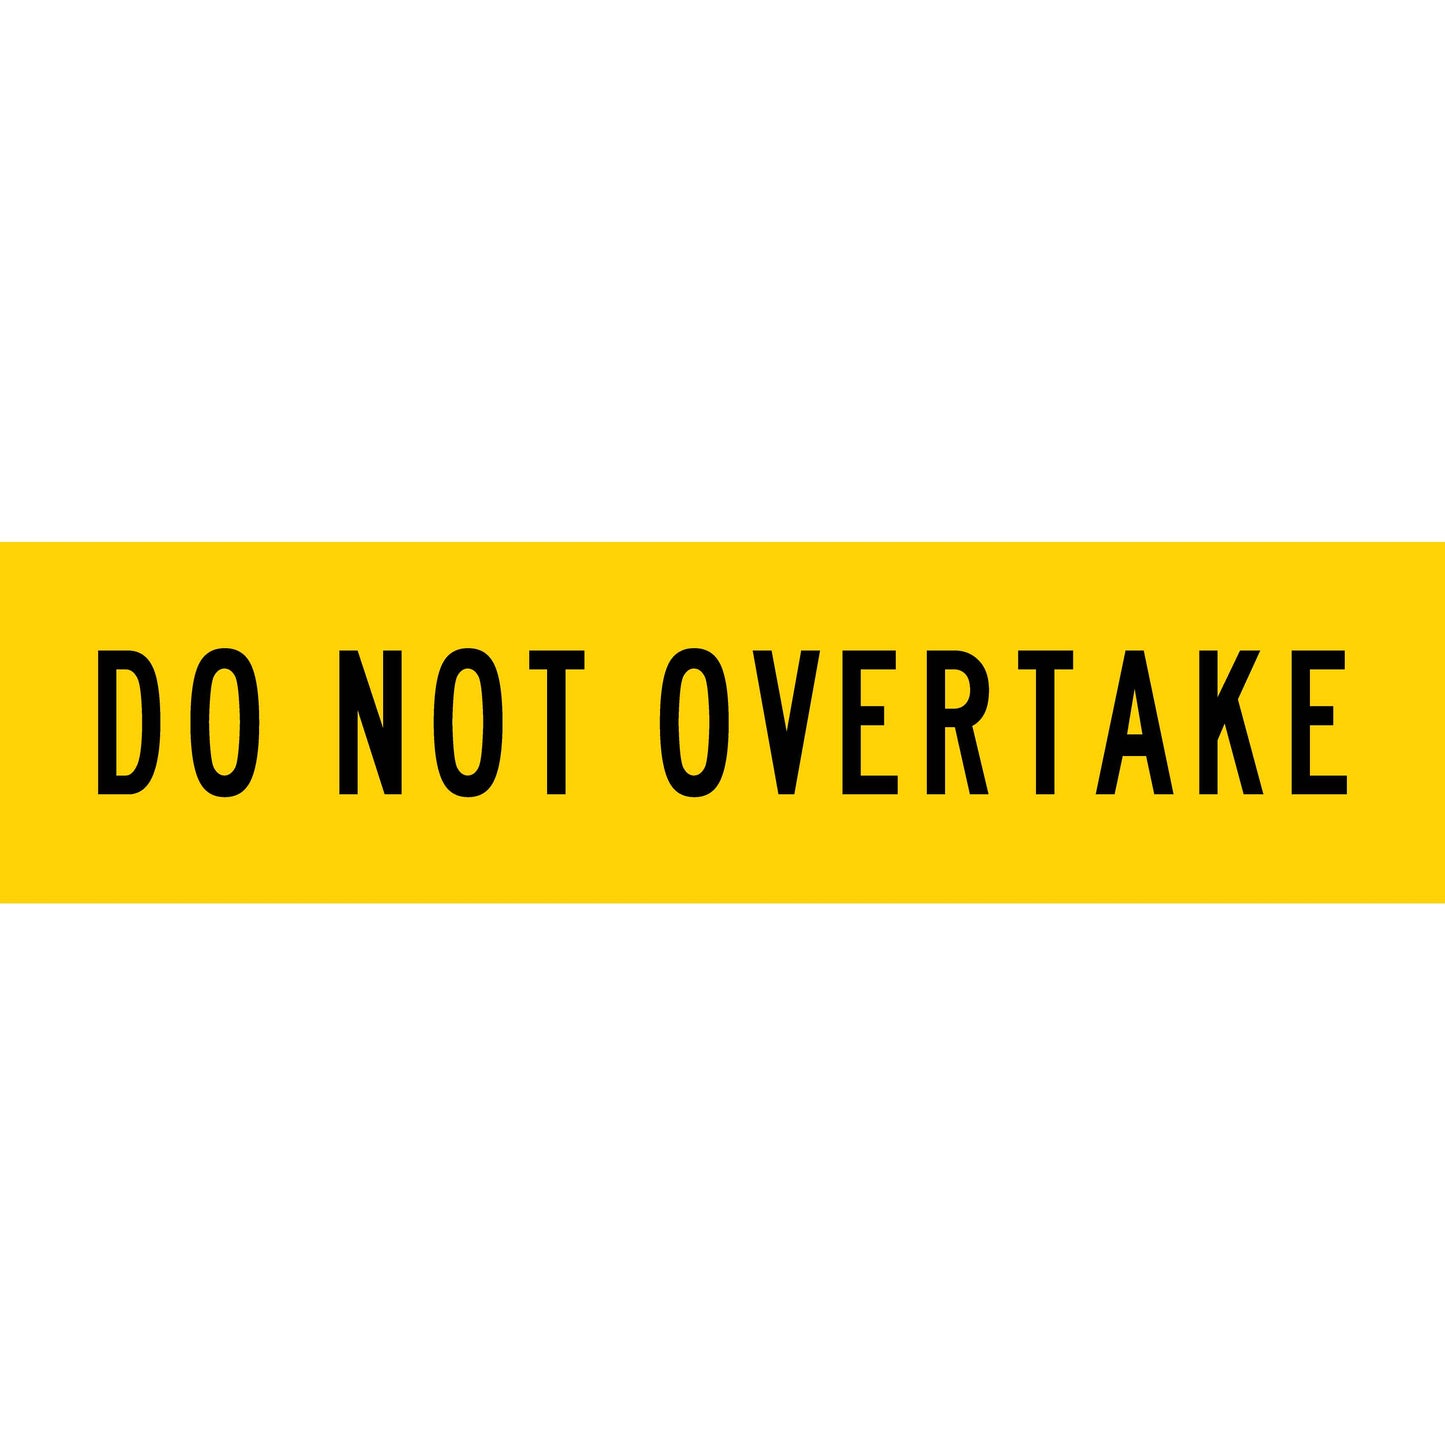 Do Not Overtake Long Skinny Multi Message Reflective Traffic Sign